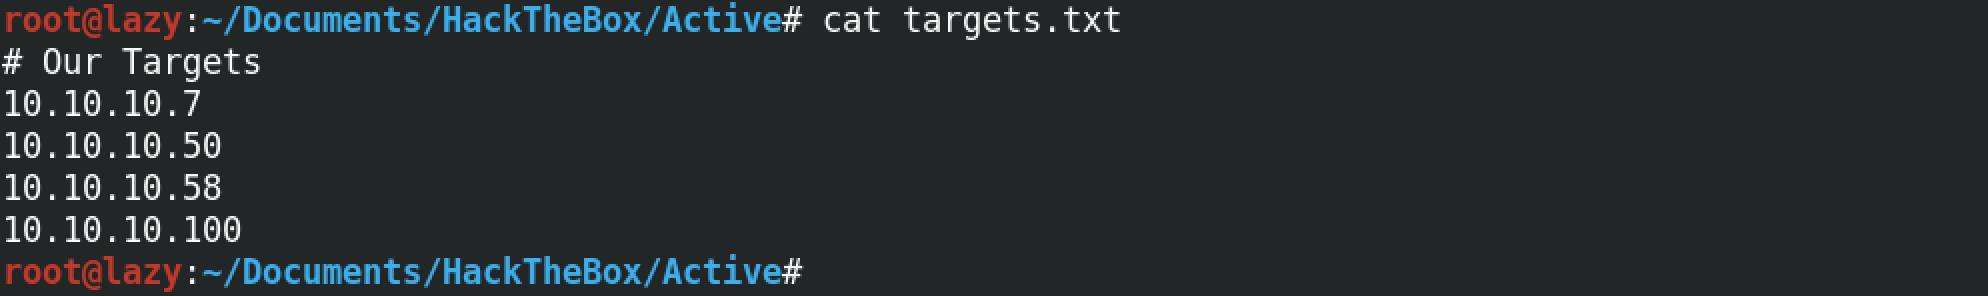 Text file containing a target list.